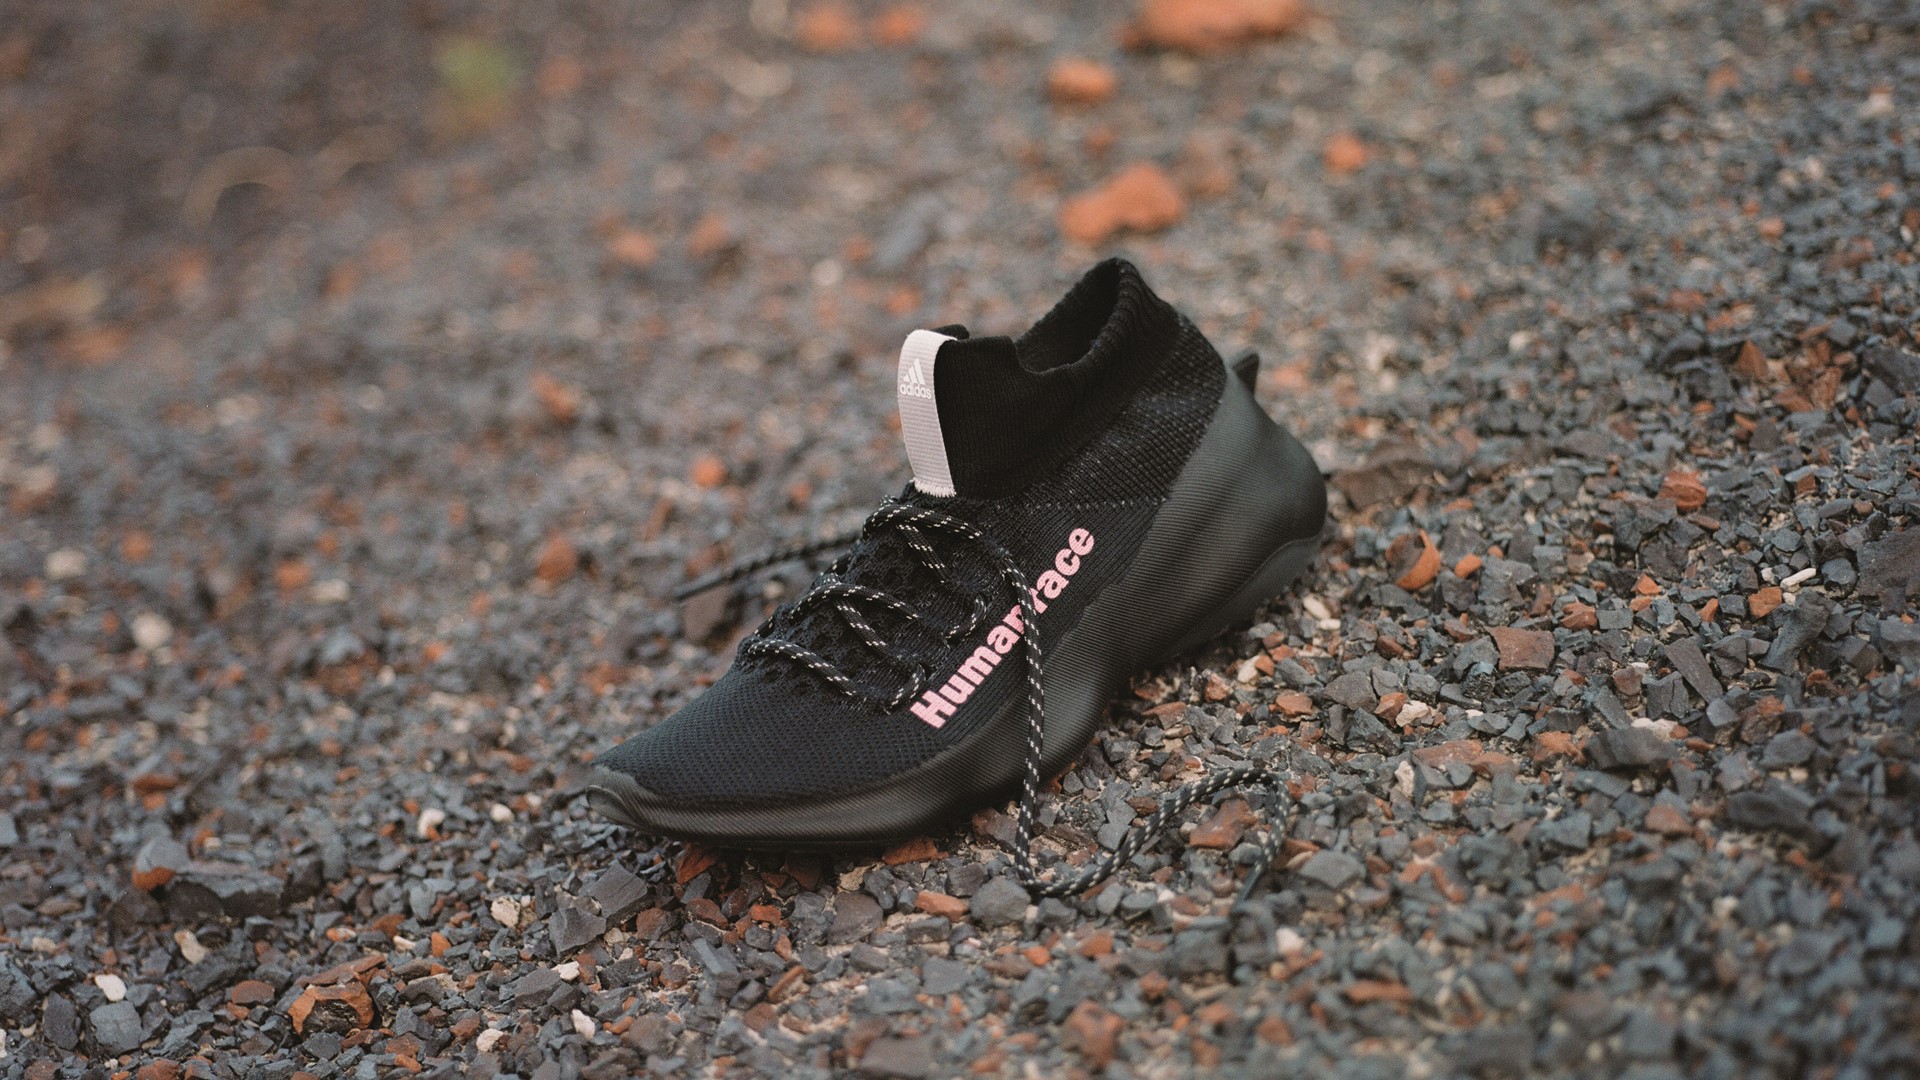 adidas and Pharrell Williams Launch New Core Black Colorway of the